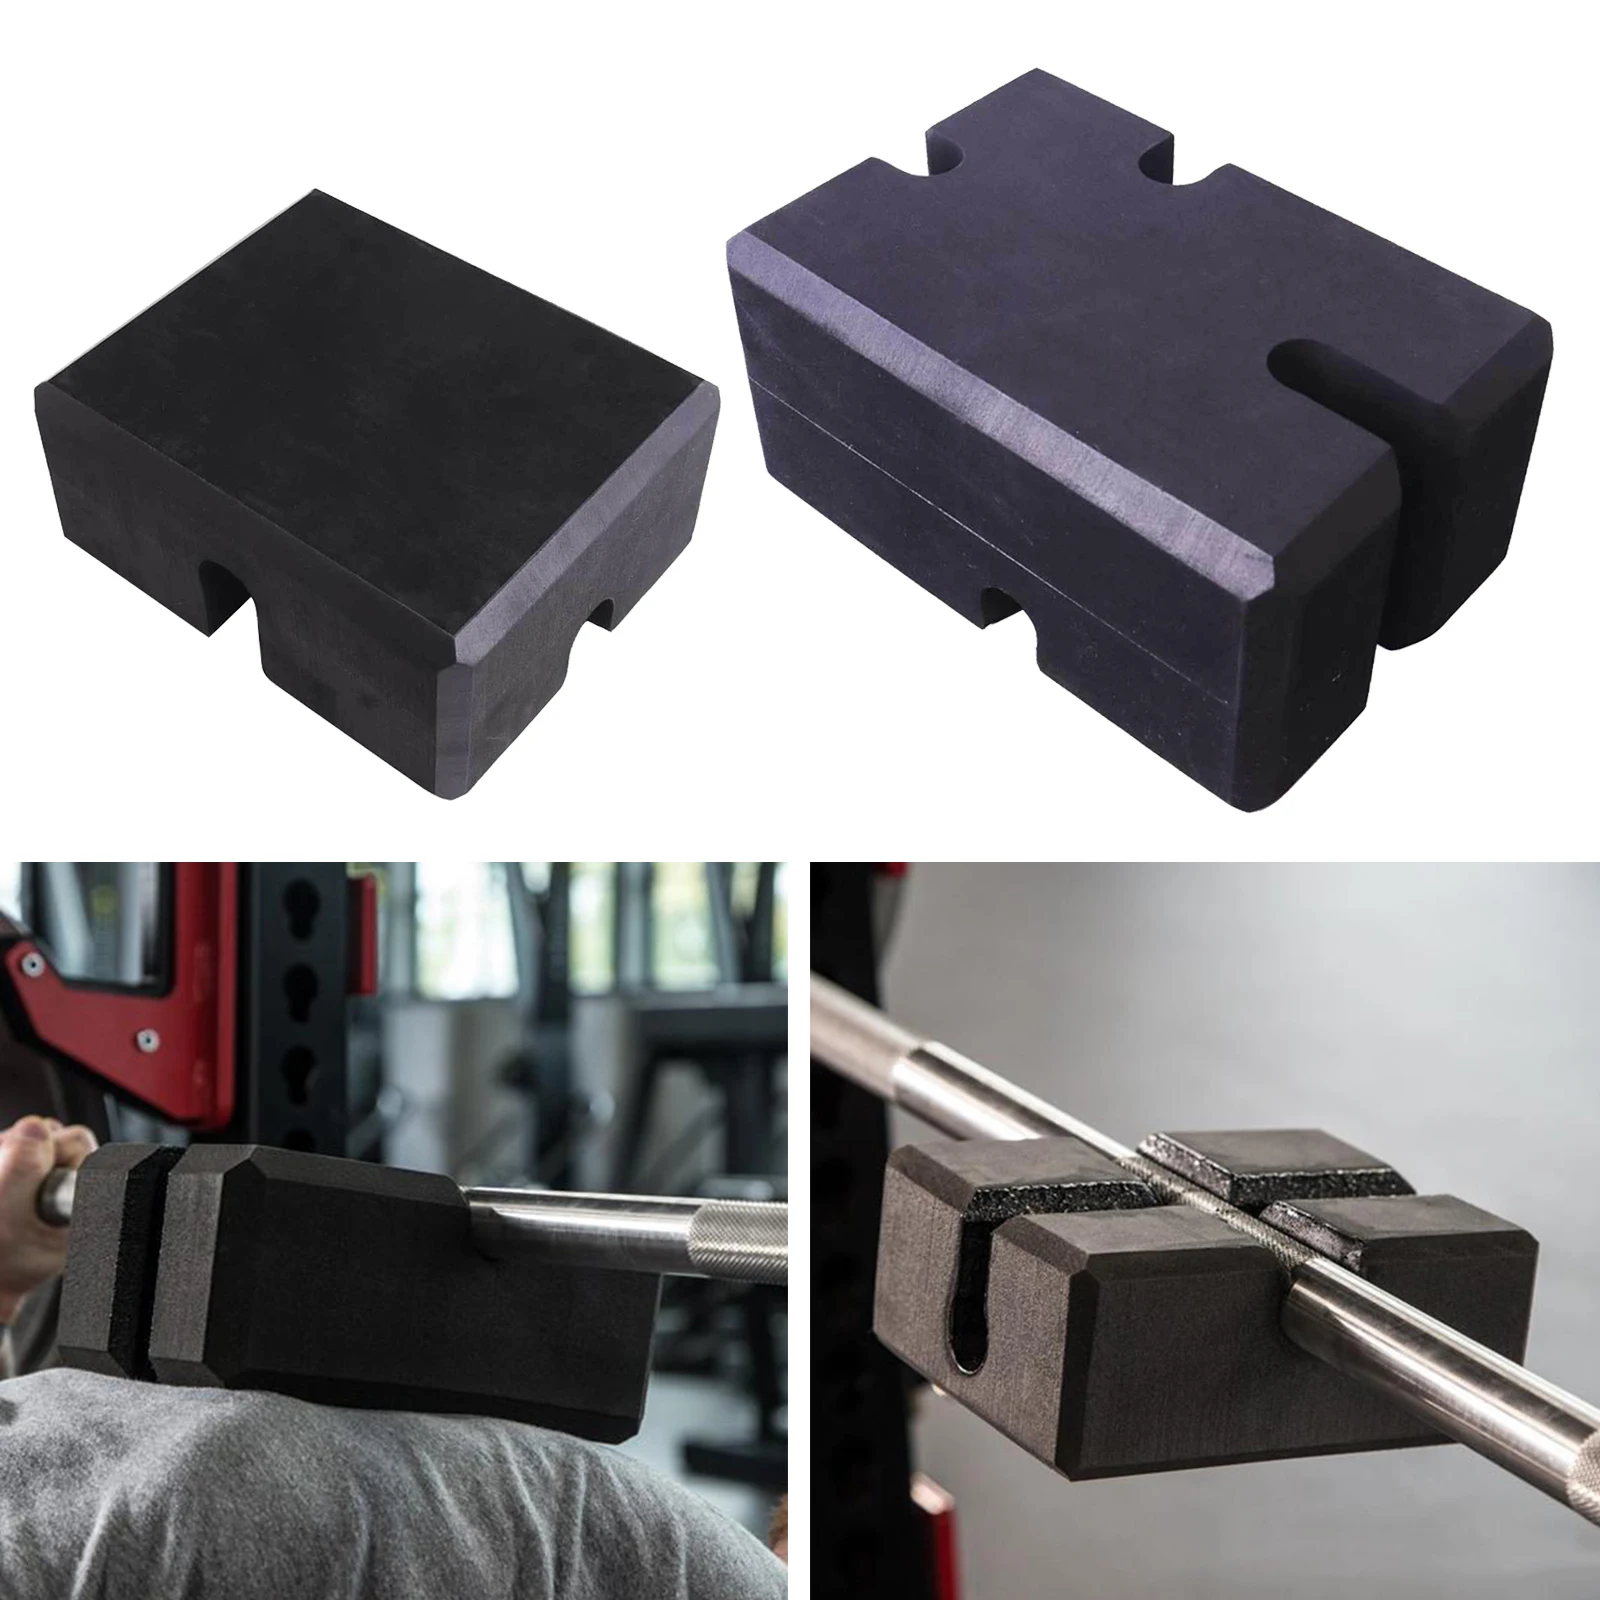 Home Gym Workout Fitness Accessories for Increase Your Bench Press LARA STAR Bench Press Block Press Blocks Boards Adjustable 2-5 Bench Board 